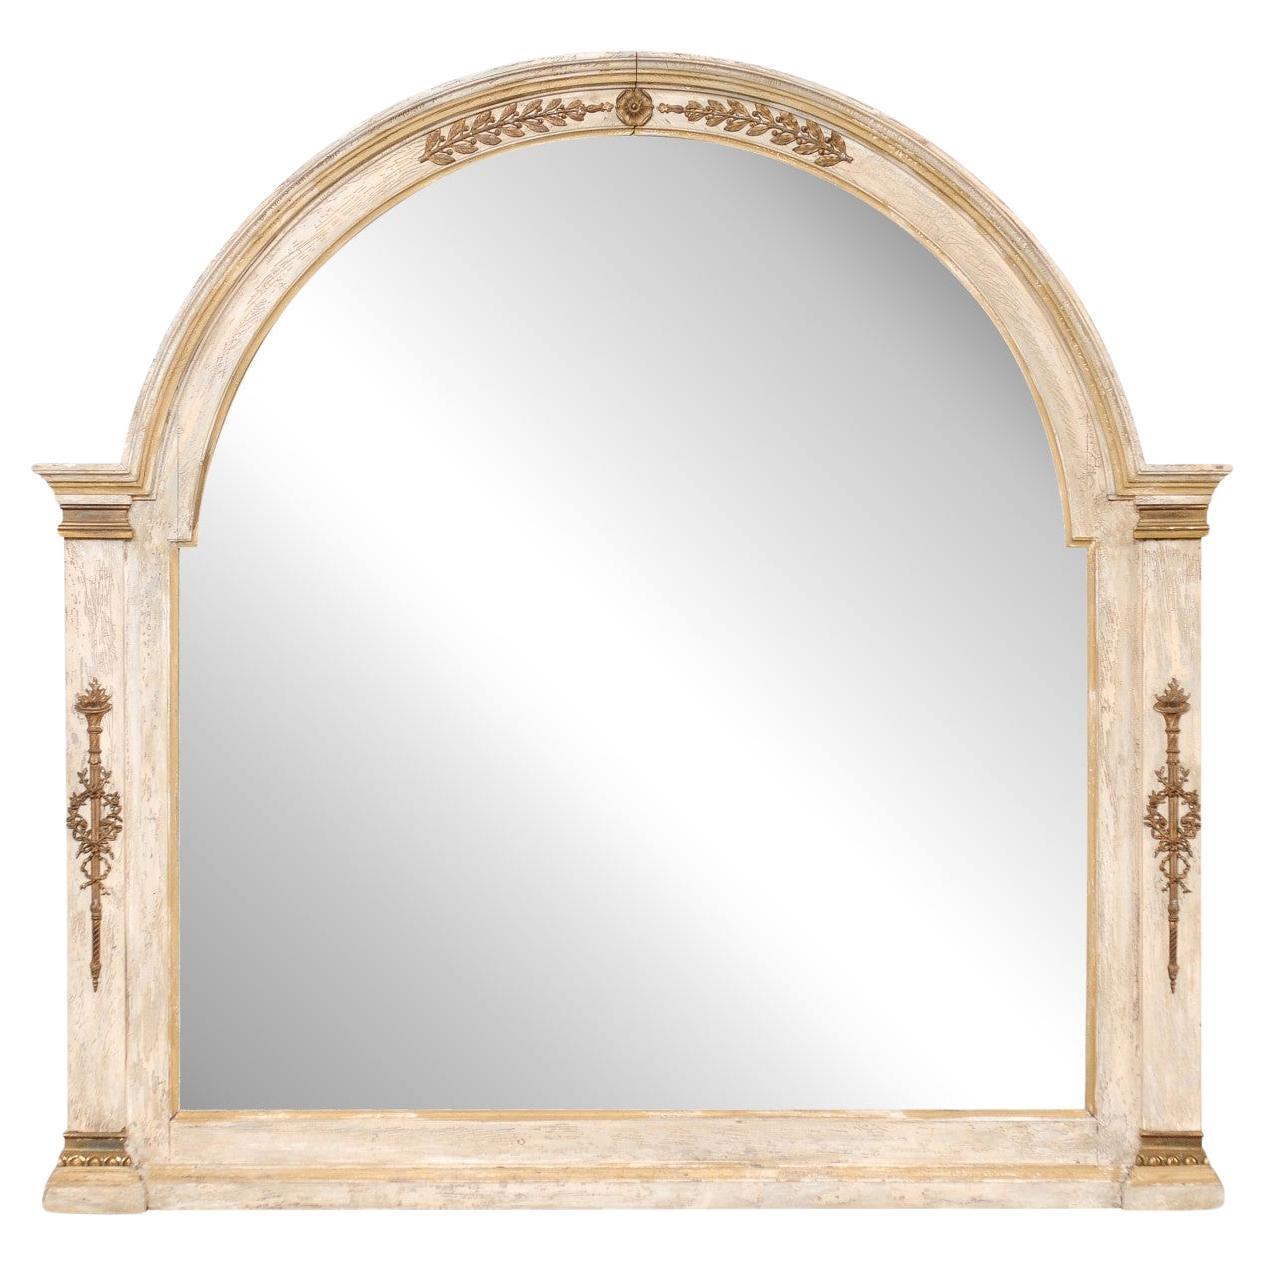 Early 20th C. French Painted Wood Mirror, Arched with Column Sides (3.5 Ft Tall)